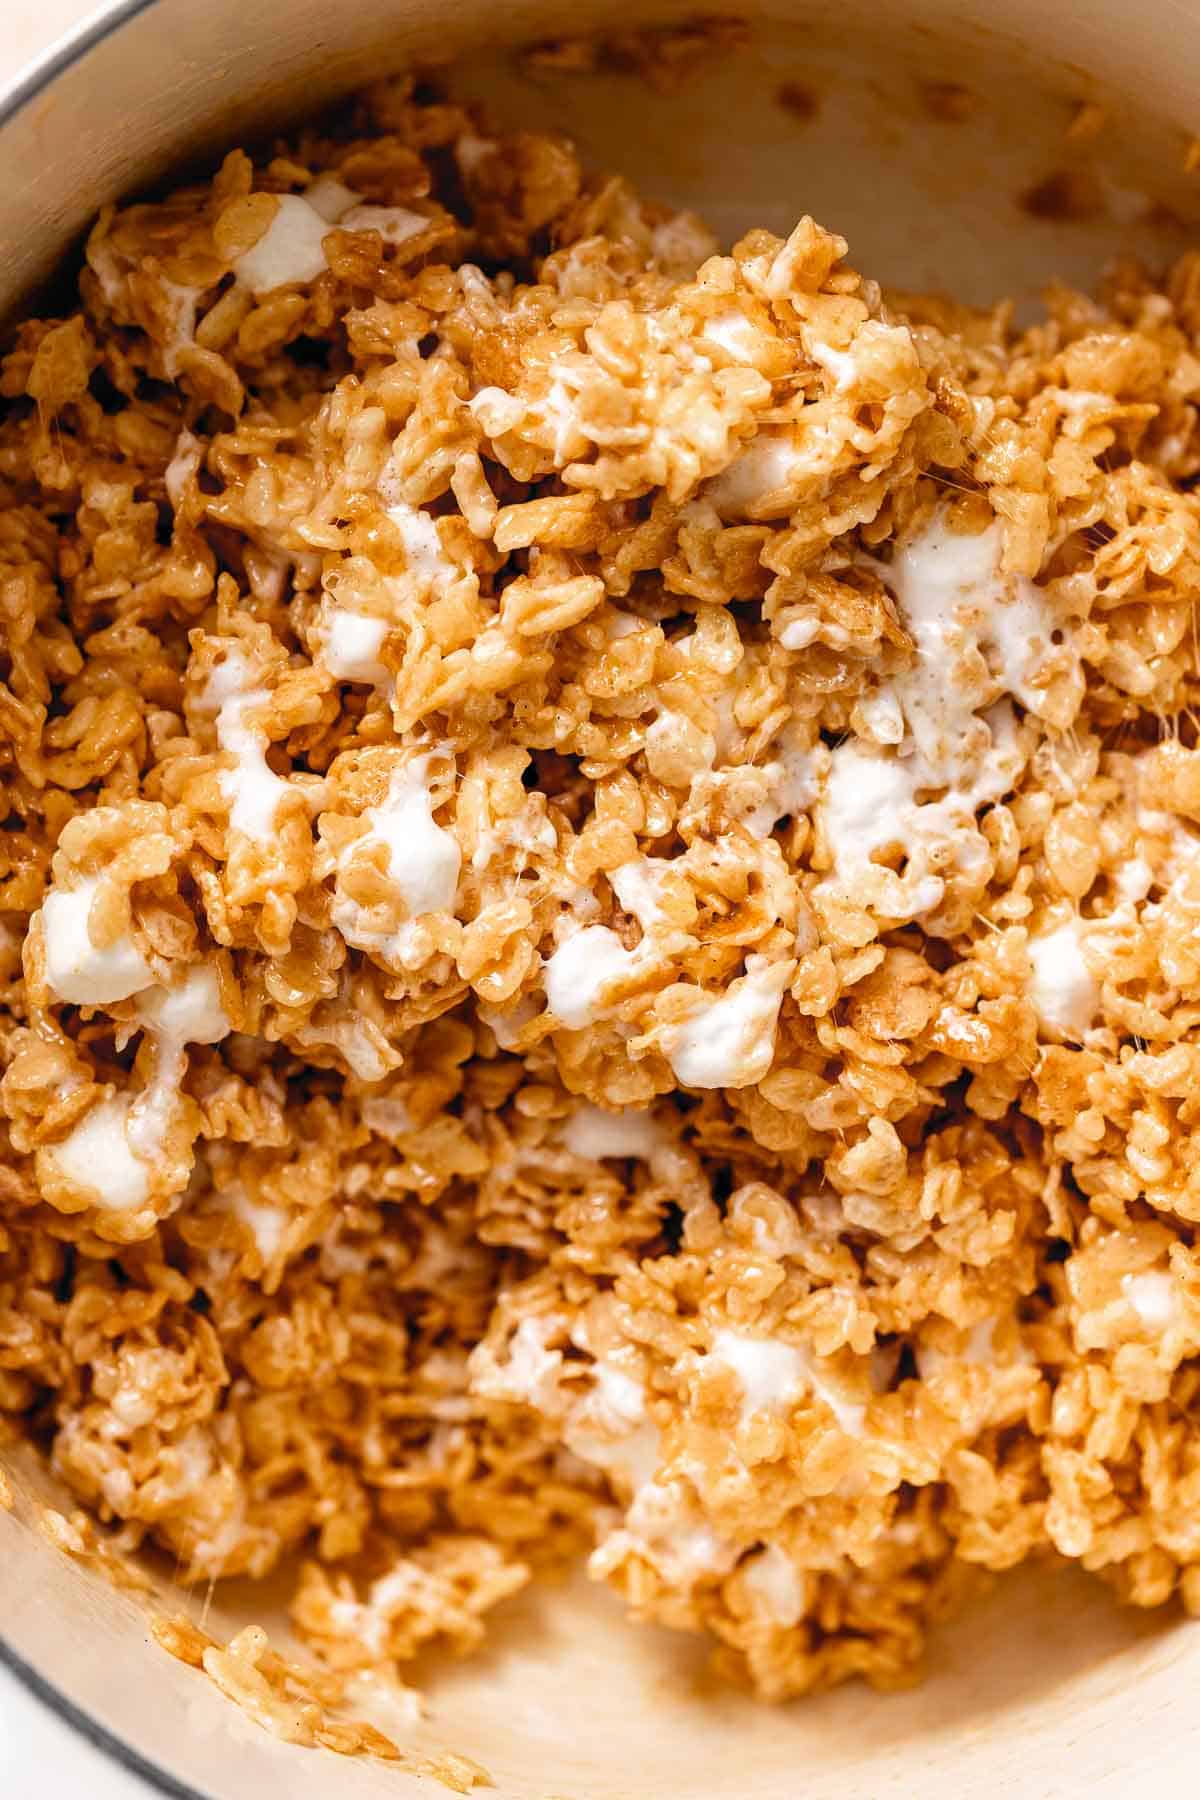 An up close shot of the rice krispie mixture after adding in the extra marshmallows to show their gooey texture.